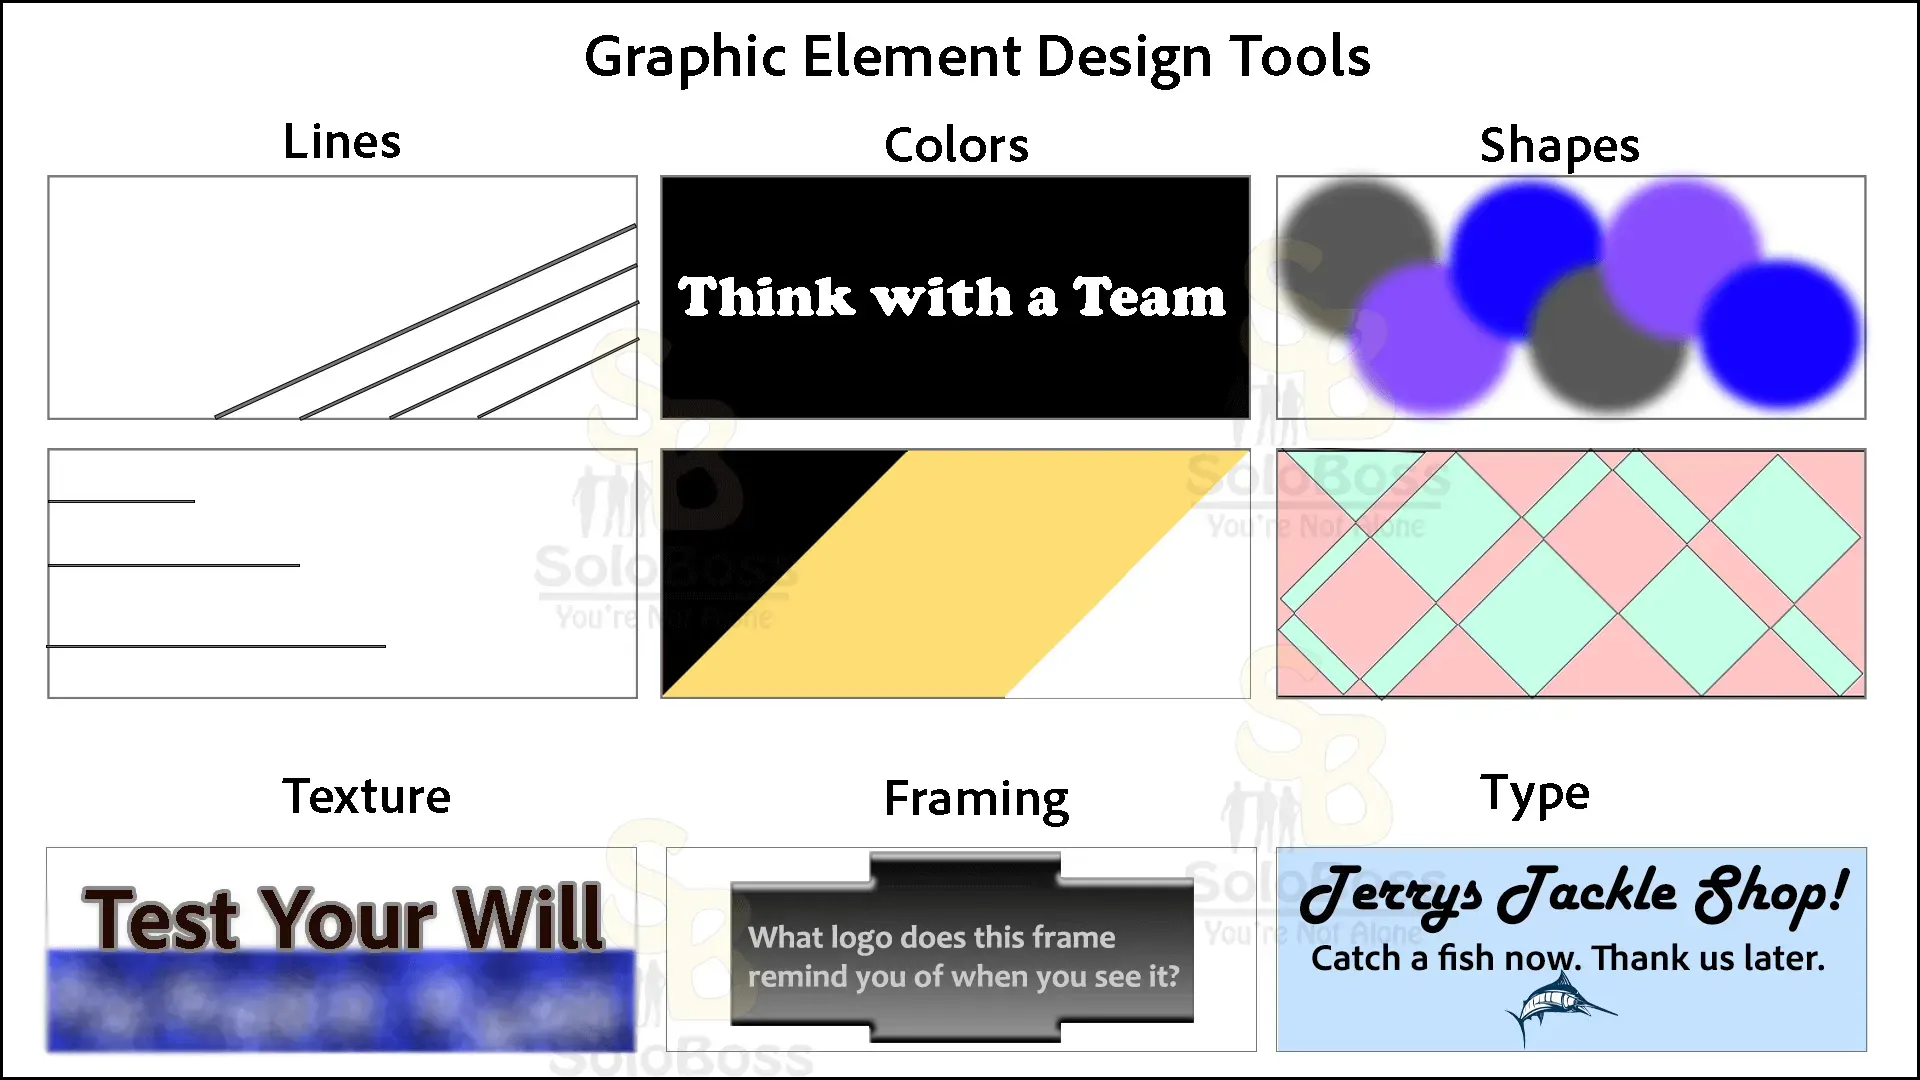 Displaying different graphic element designs.